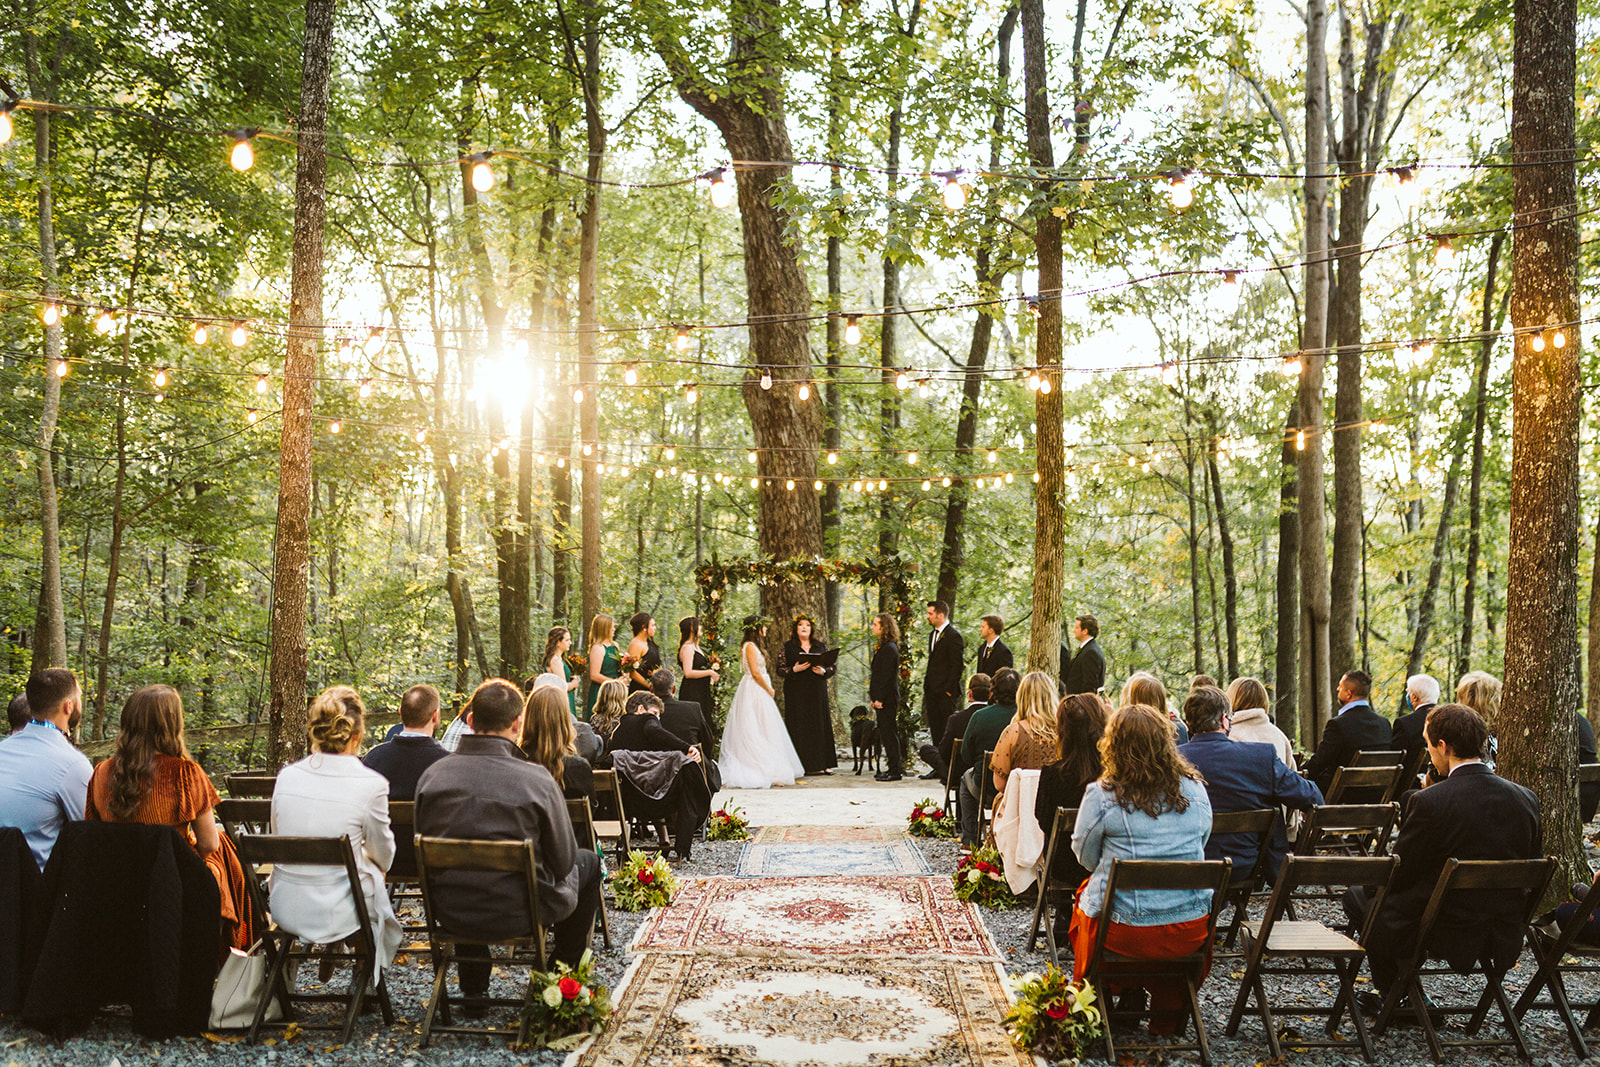 Bride and groom exchange vows in a forest as friends and family look on. The aisle is lined with vintage rugs, and the altar is lit up with strings of lights.